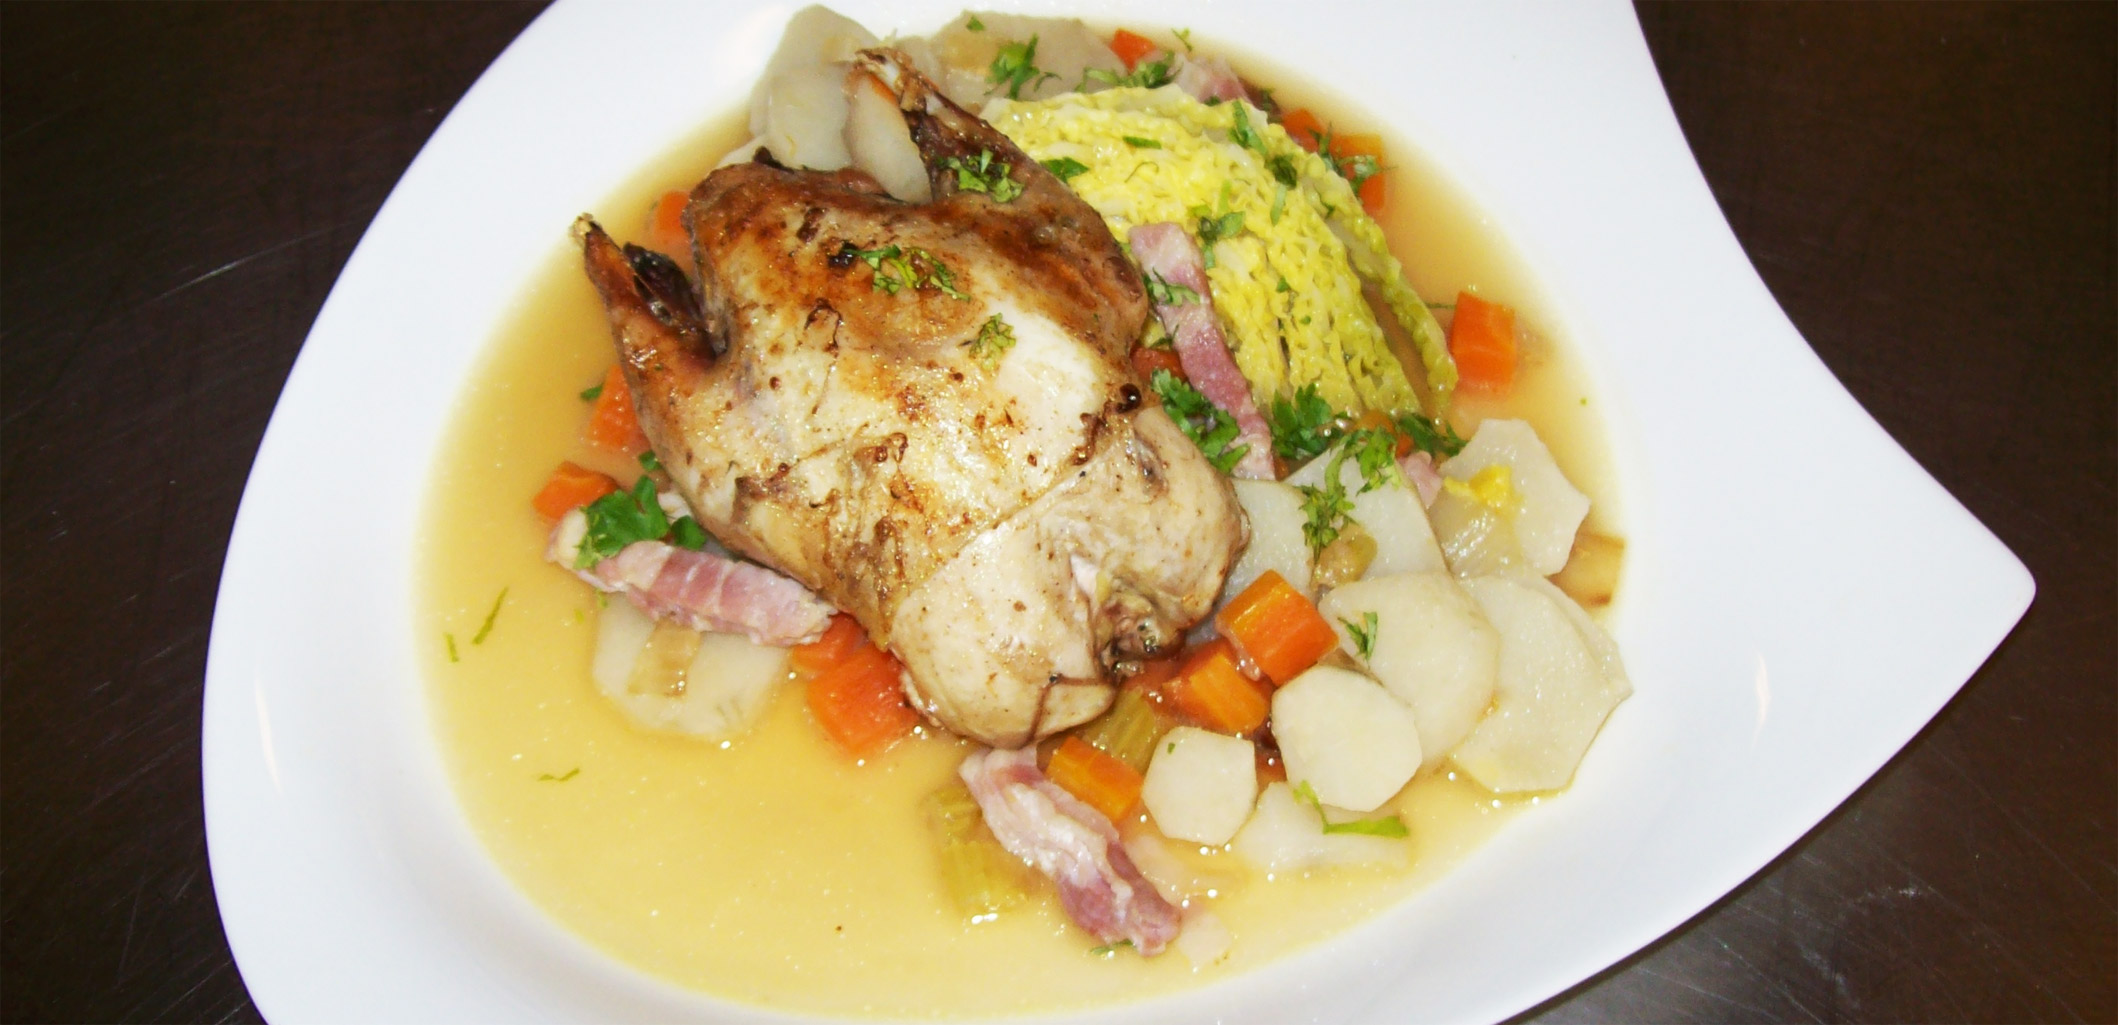 Partridge with Cabbage & Artichokes